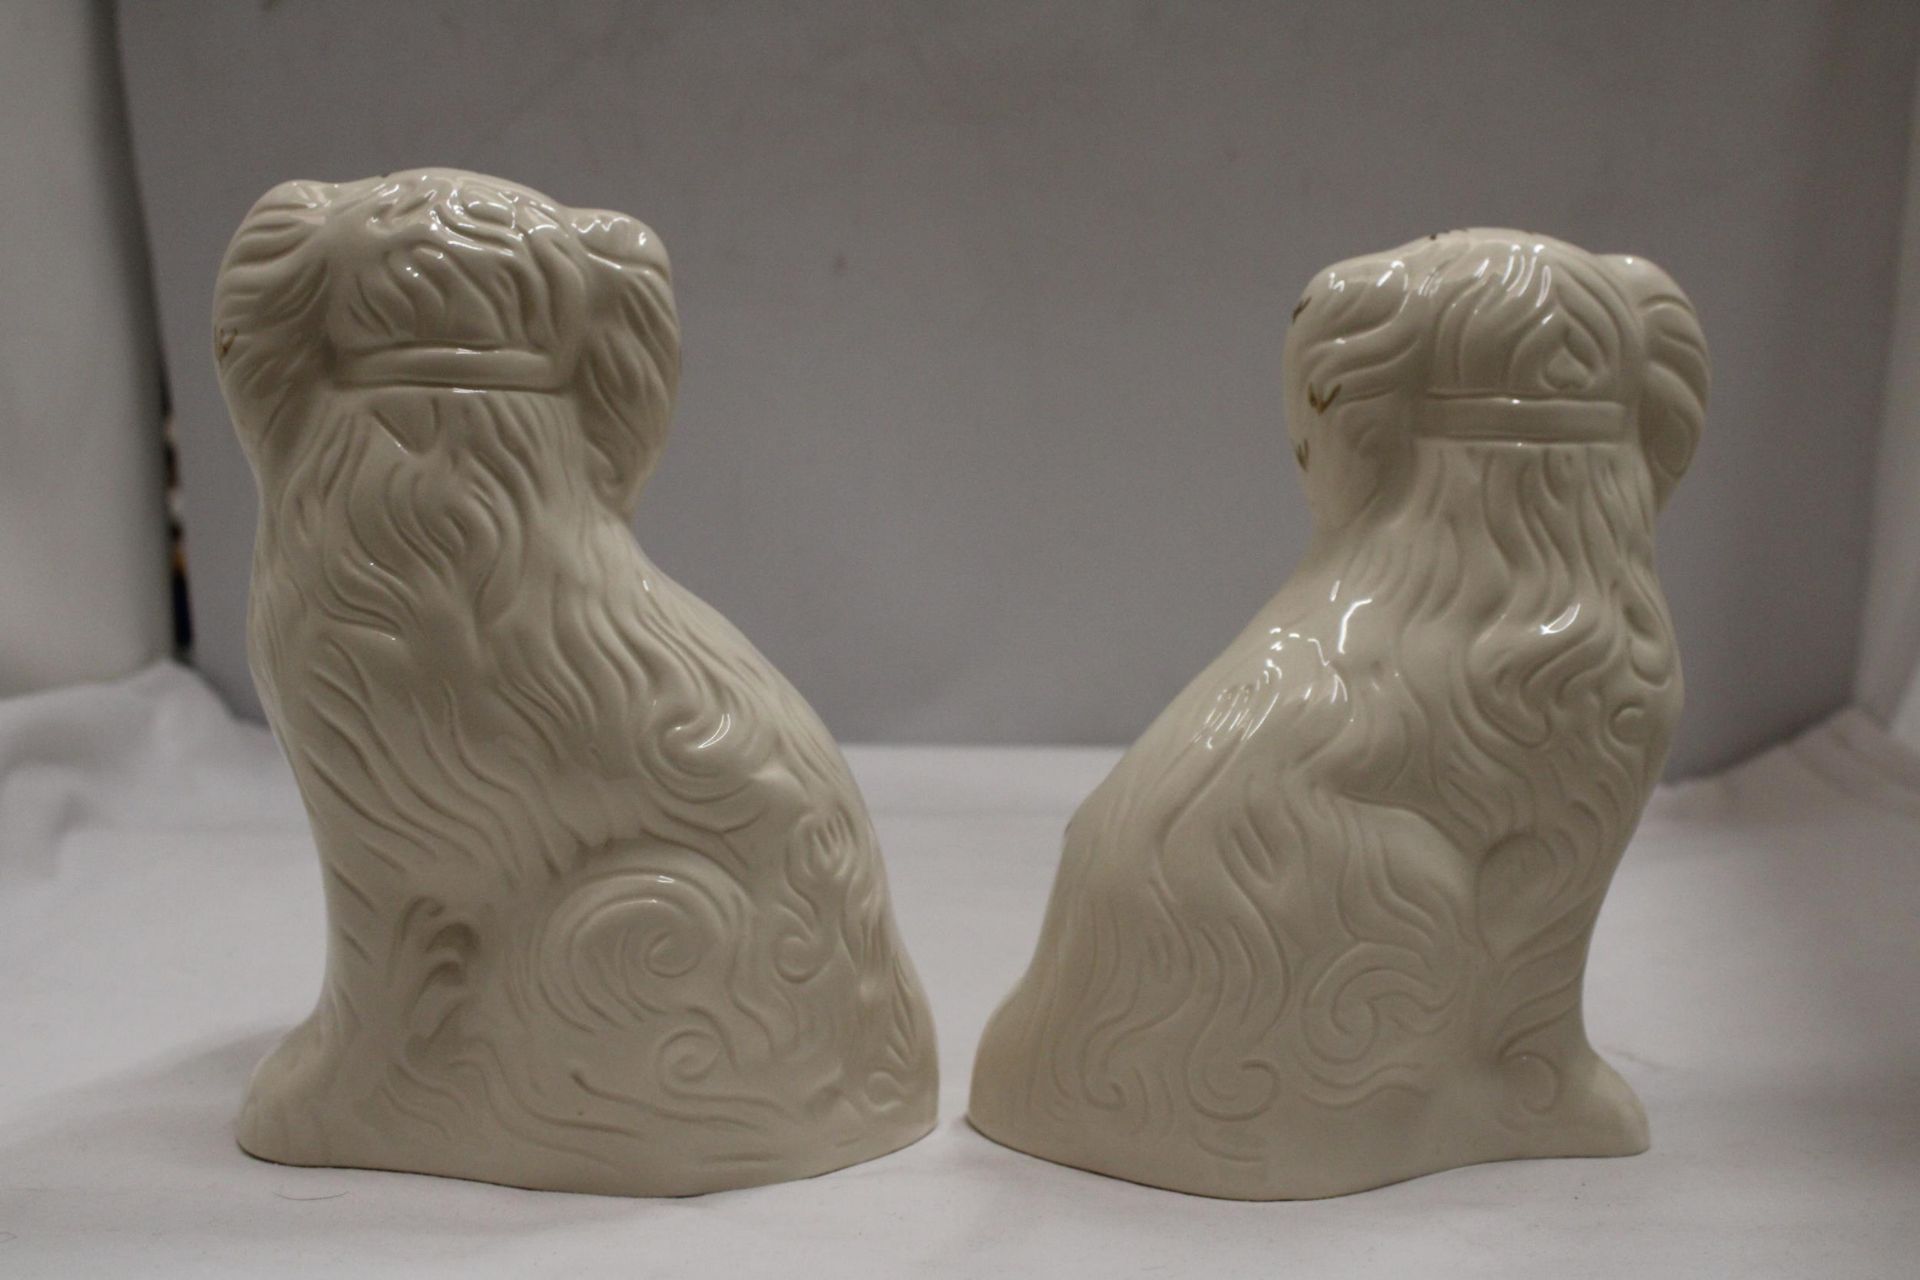 A LARGE SIZED PAIR OF ROYAL DOULTON SPANIEL DOGS IN ORIGINAL BOX - Image 4 of 6